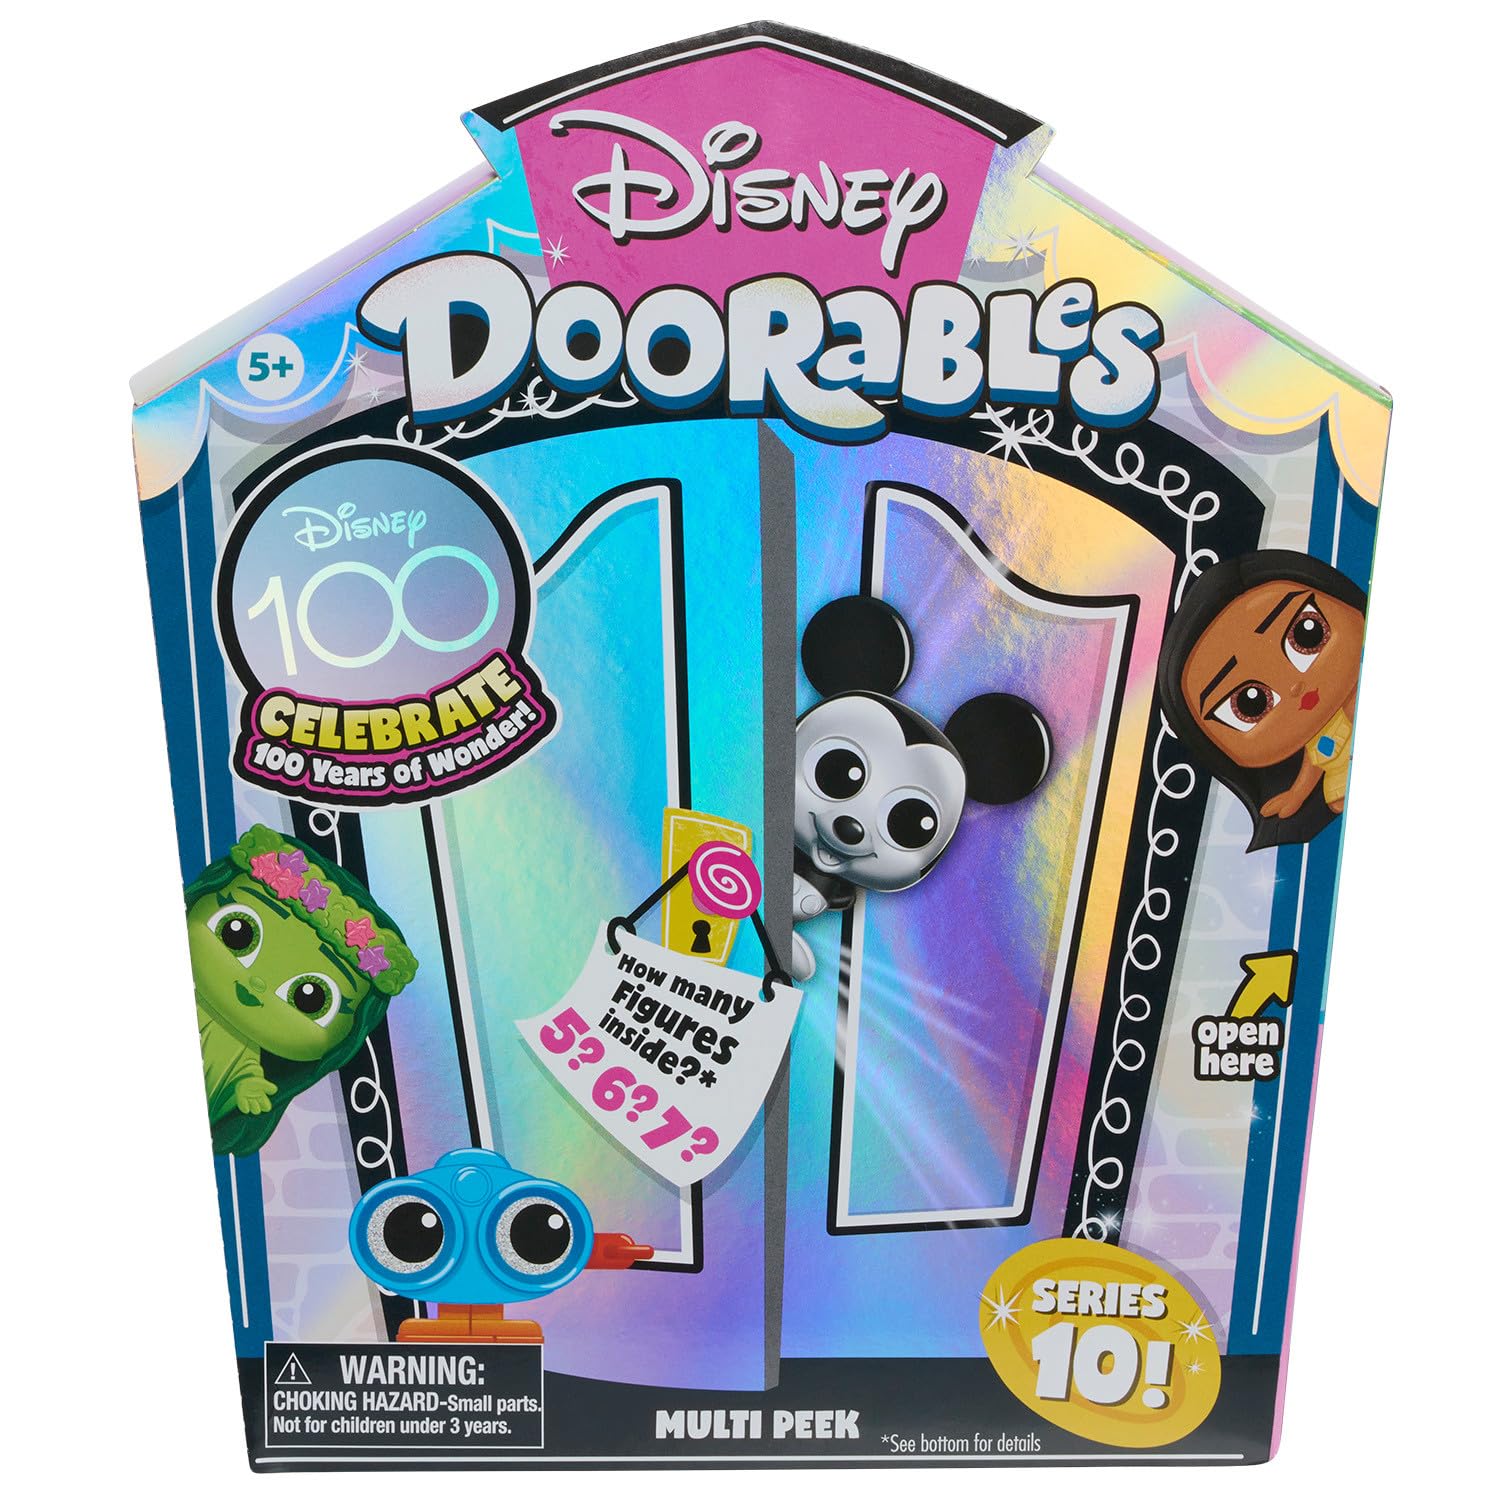 Disney Doorables NEW Multi Peek Series 10, Collectible Blind Bag Figures, Styles May Vary, Officially Licensed Kids Toys for Ages 5 Up by Just Play